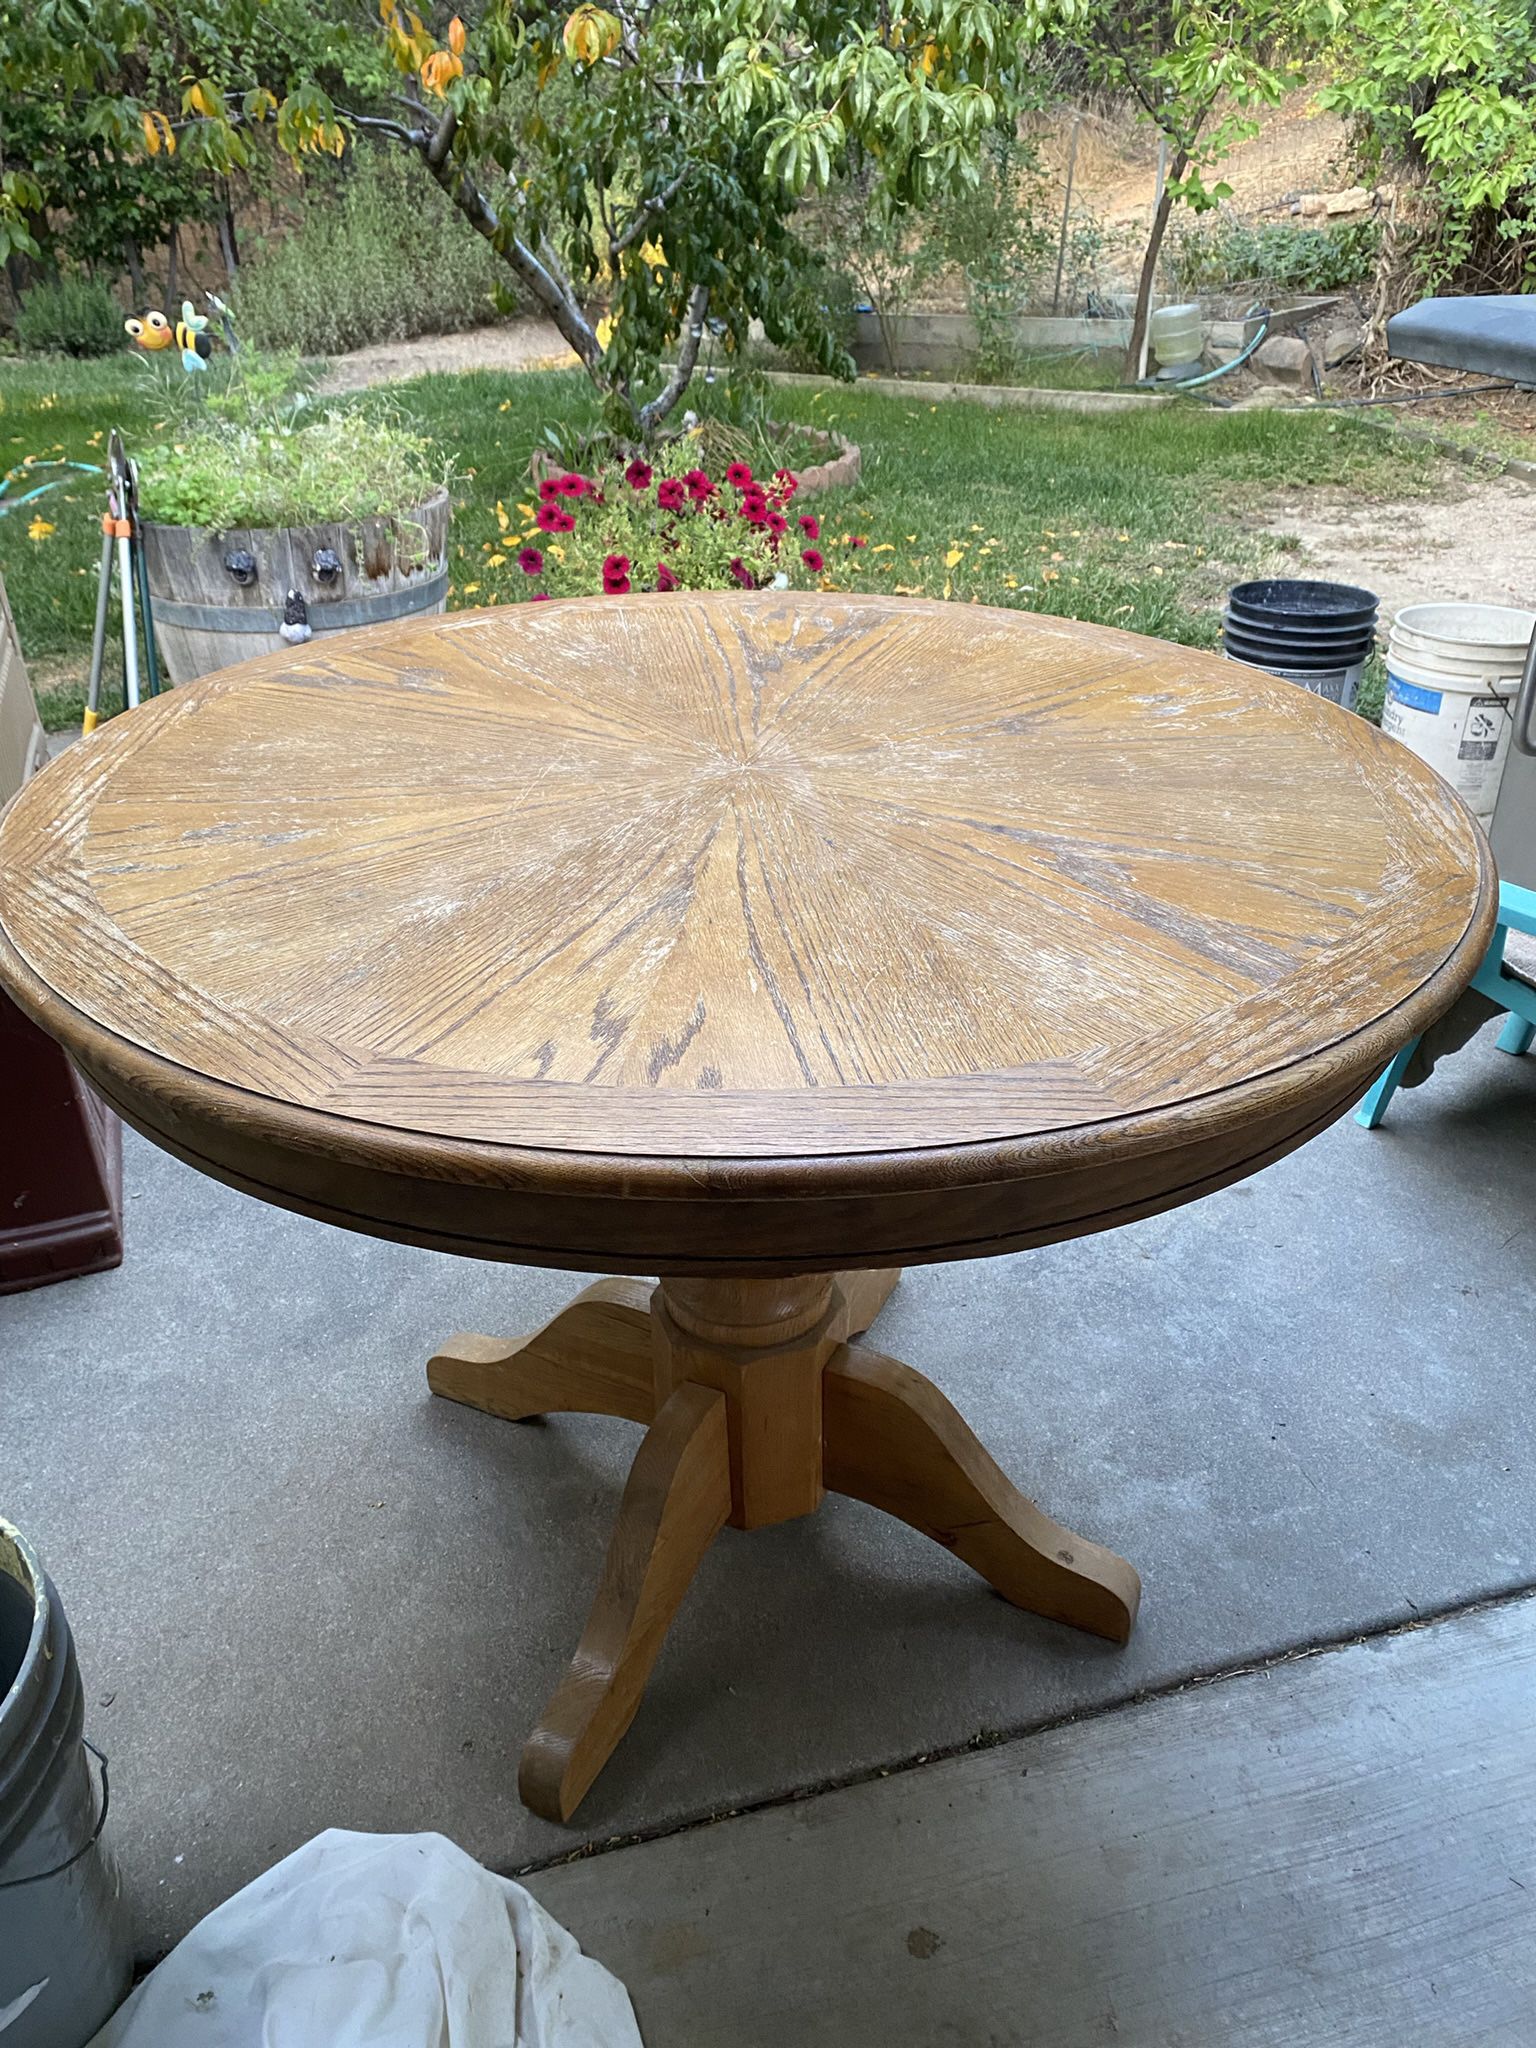 42” round table